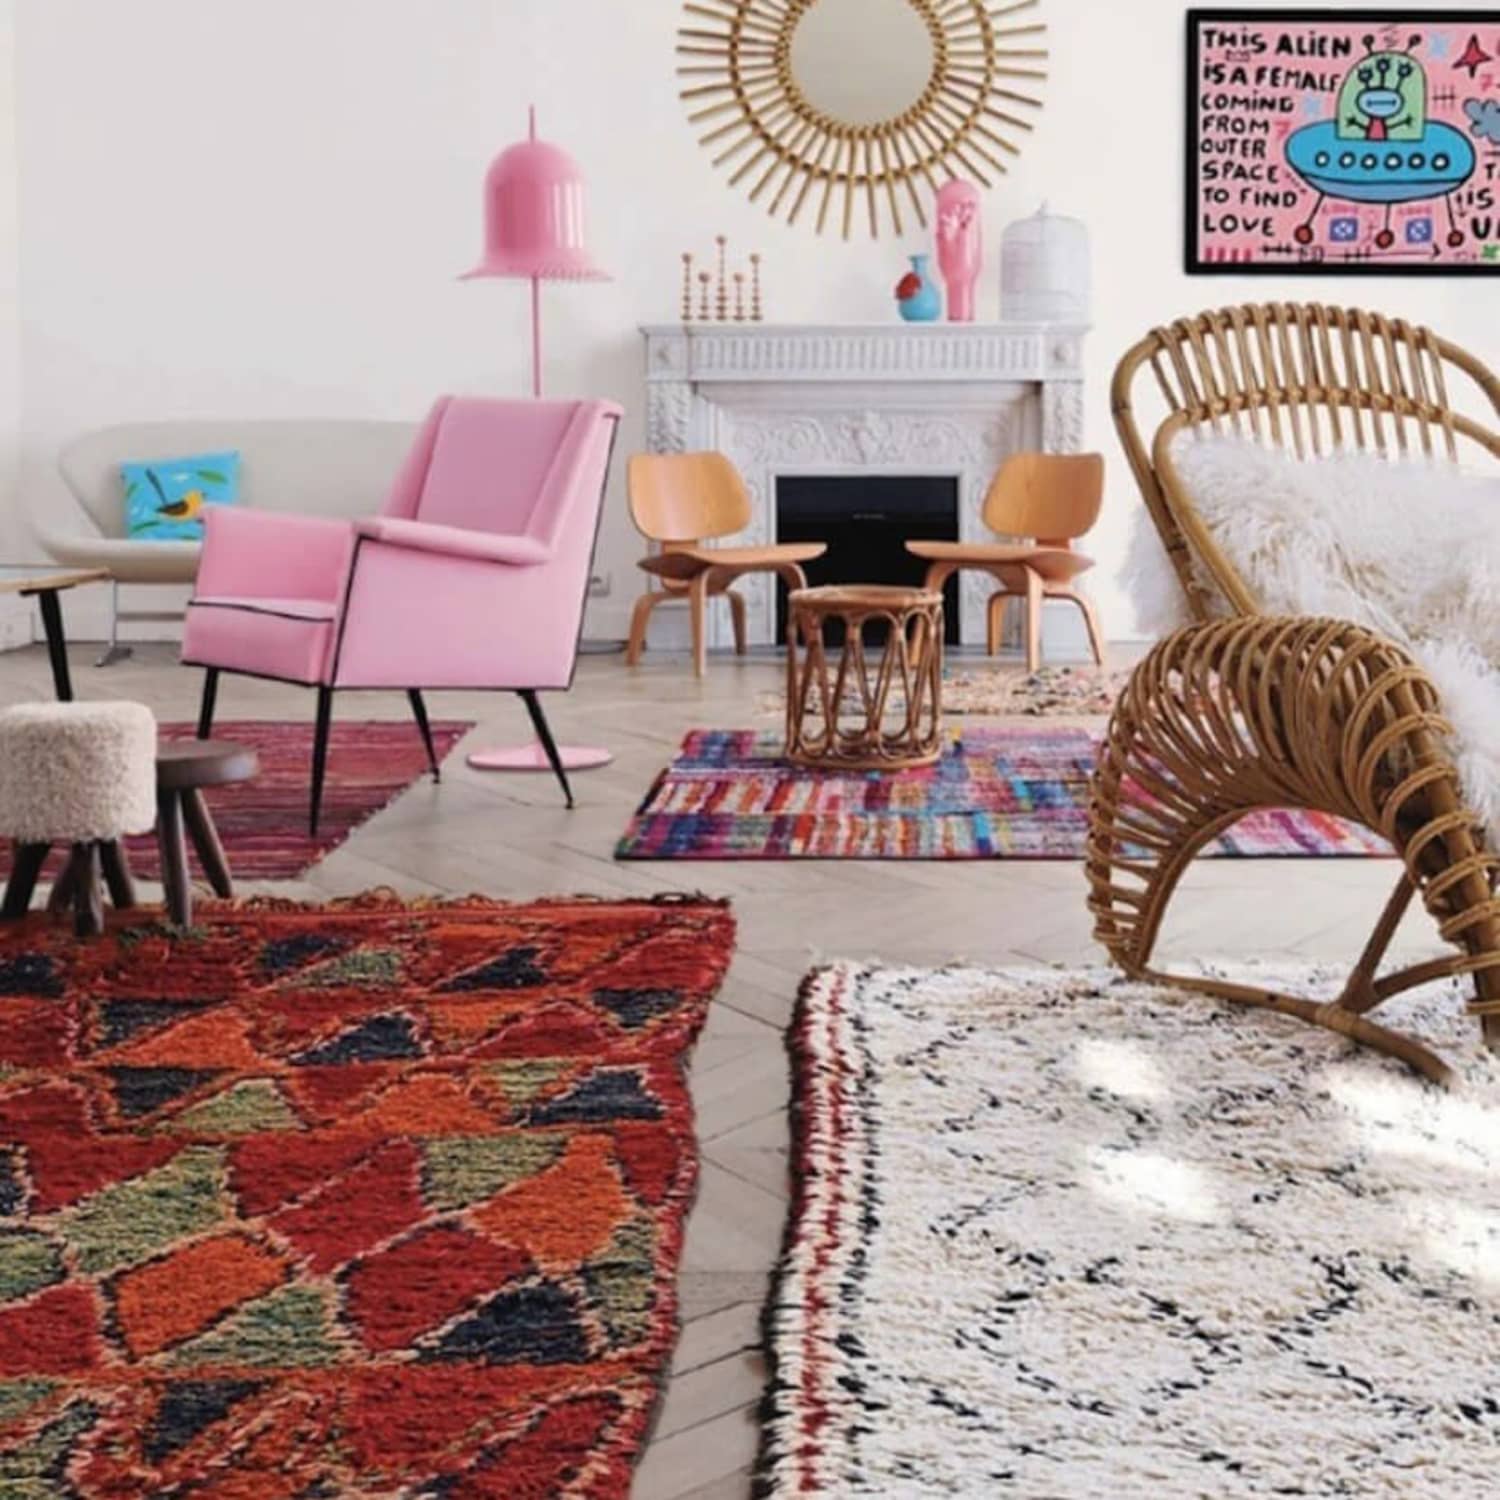 Patterned Rugs vs Plain Rugs: What Should You Choose?